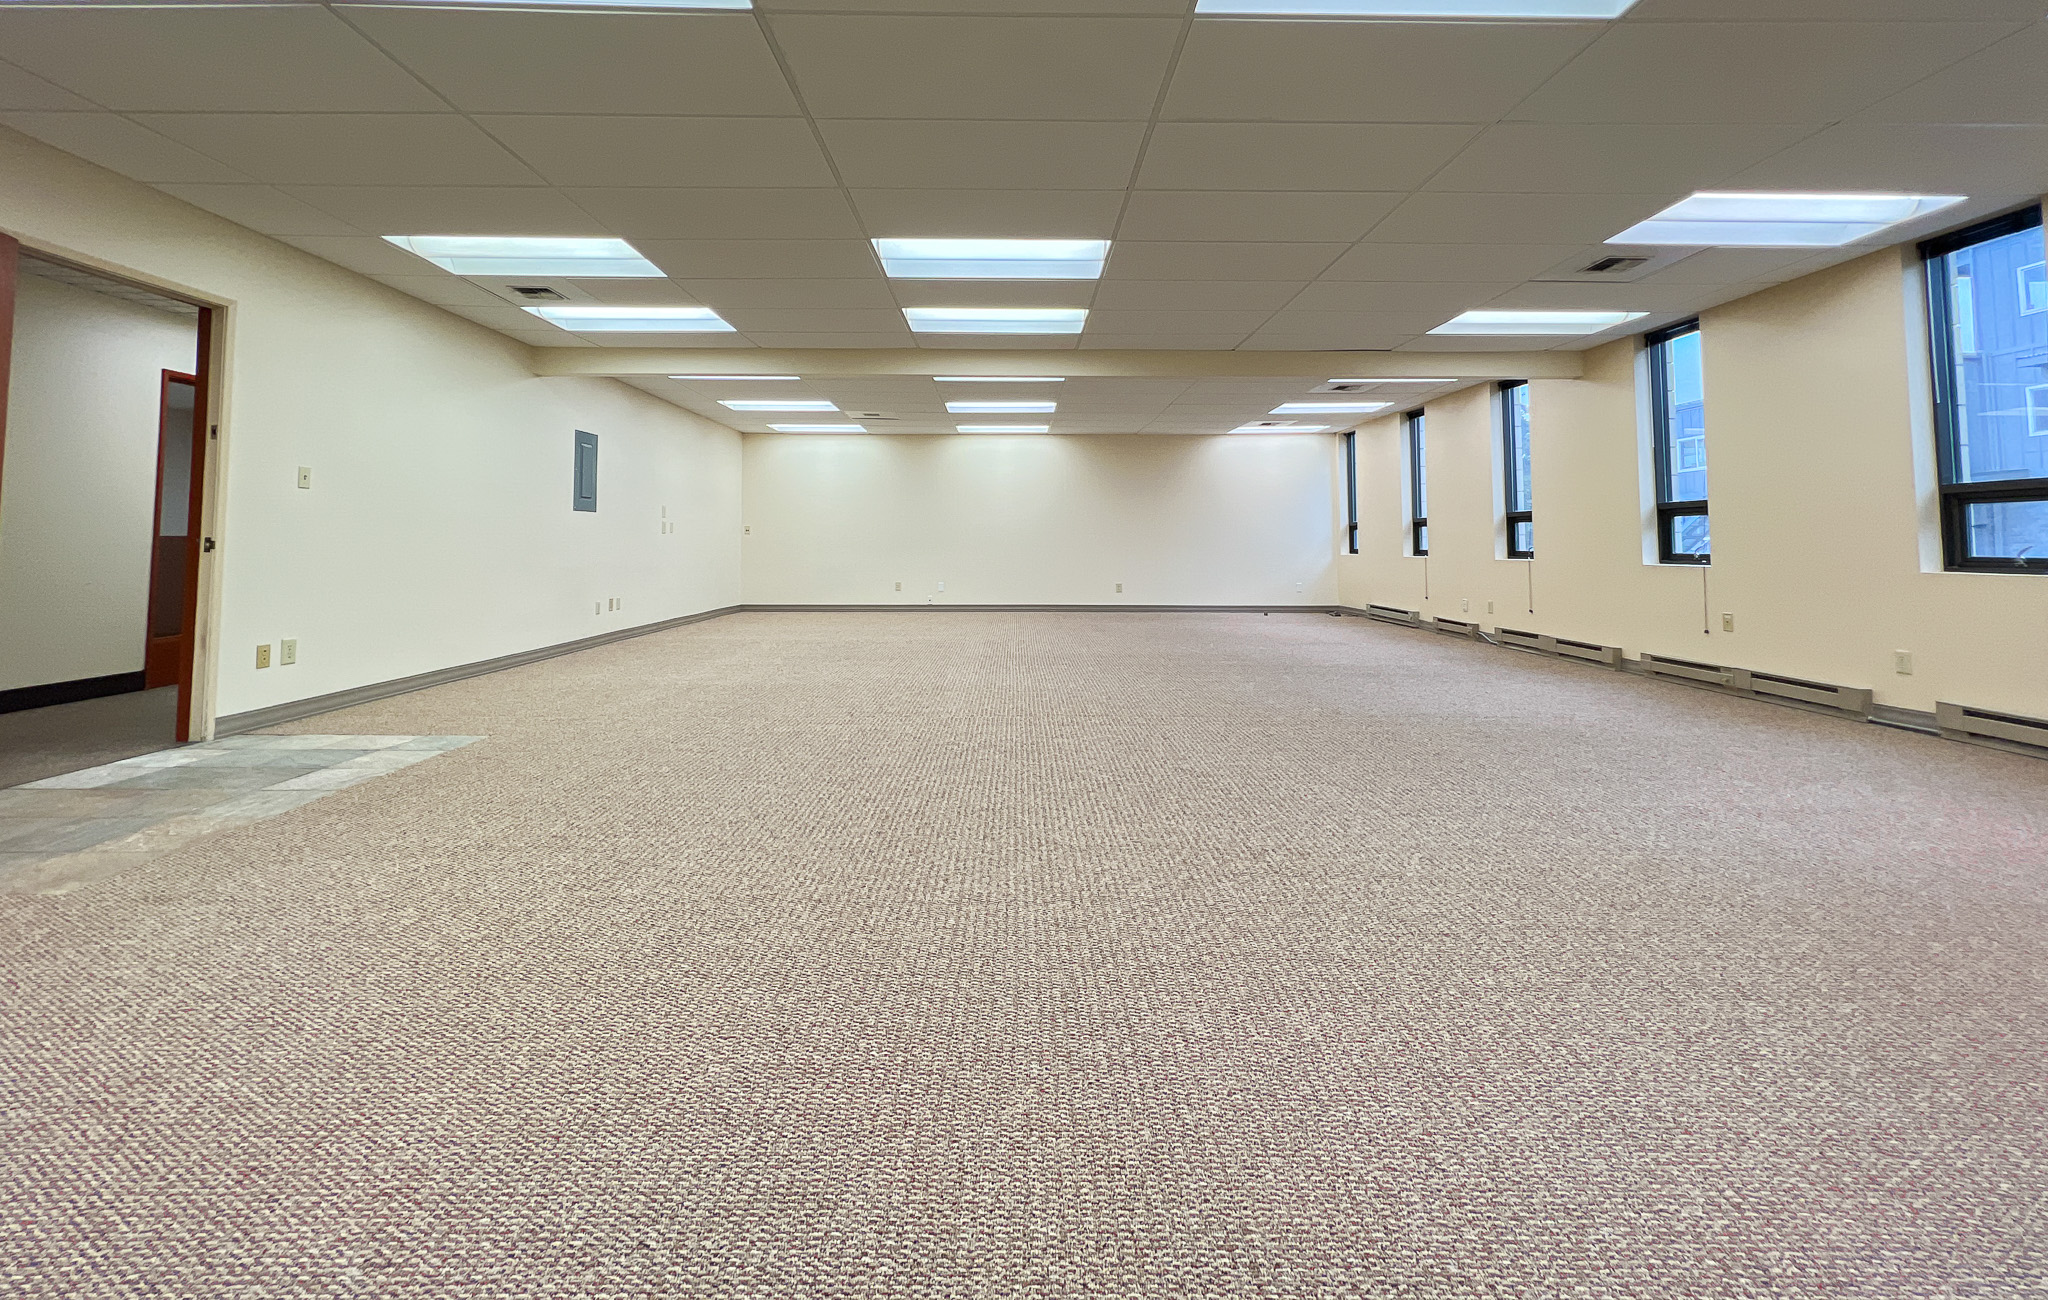 Interior of RSD Properties' Suite 102 in the 750 W 2nd Avenue office commercial office building in Anchorage, Alaska. Several windows on the right, tan carpeting and a drop ceiling with exit door on the left